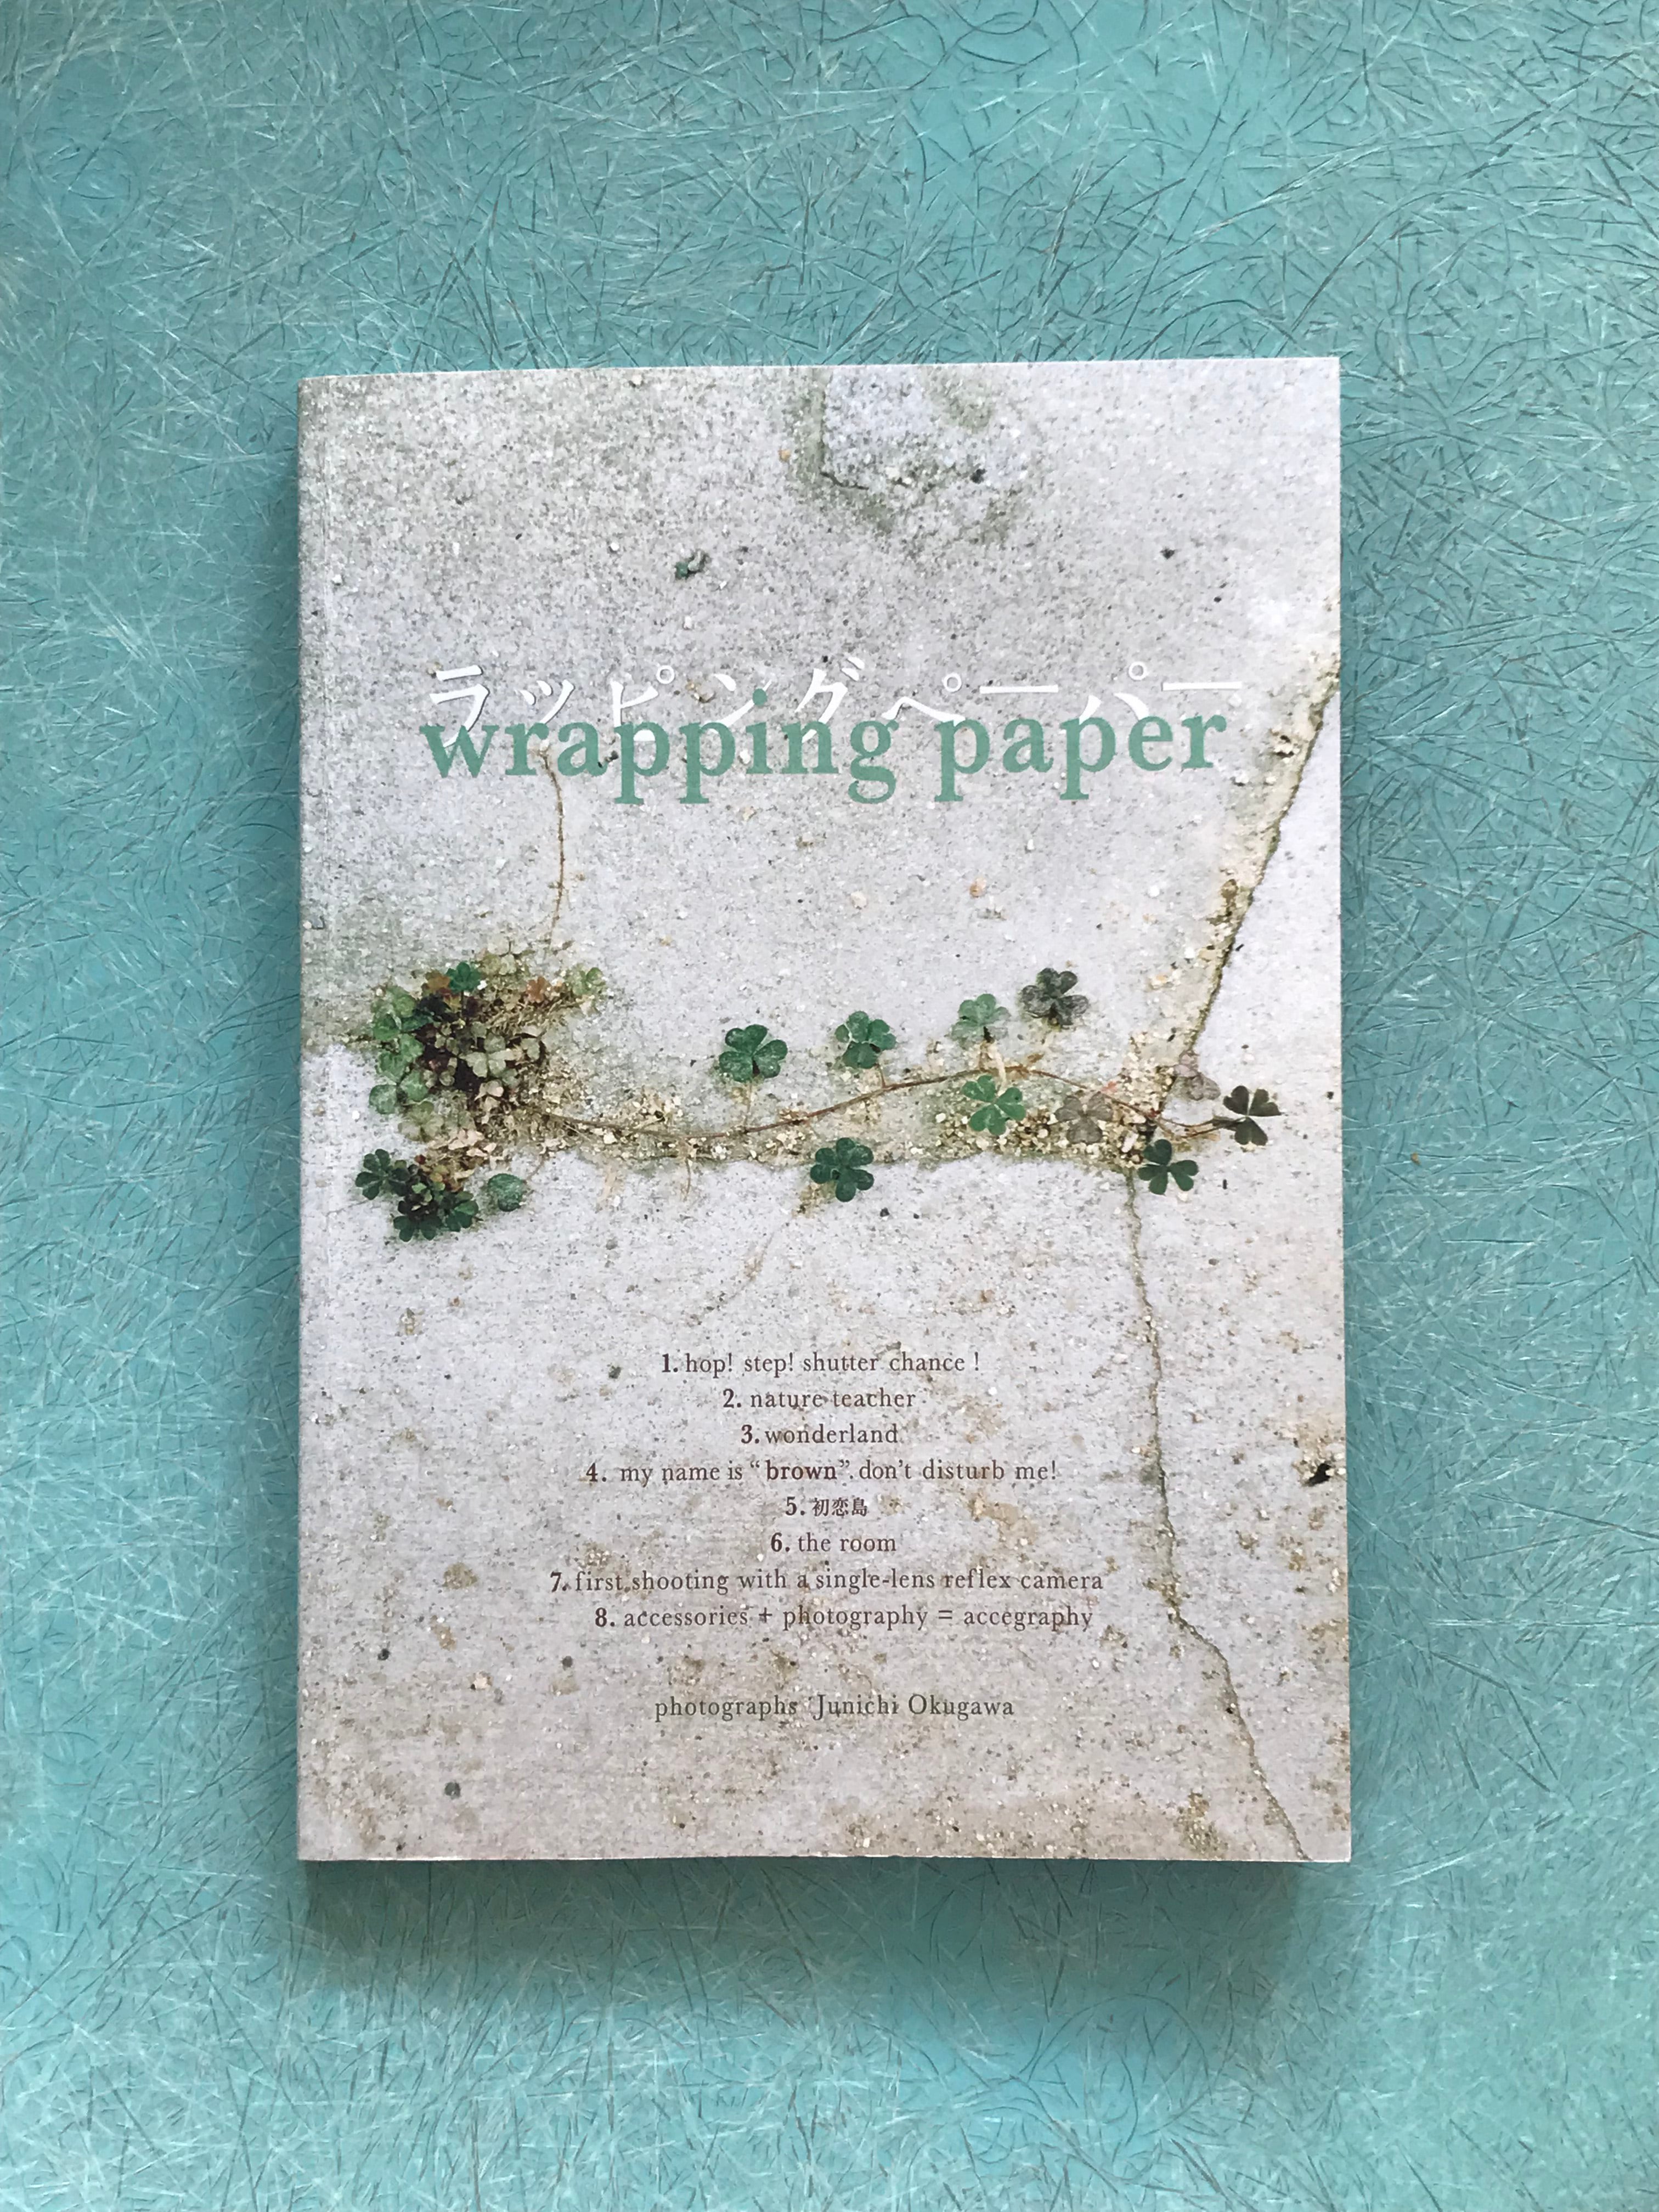 『wrapping paper』奥川純一